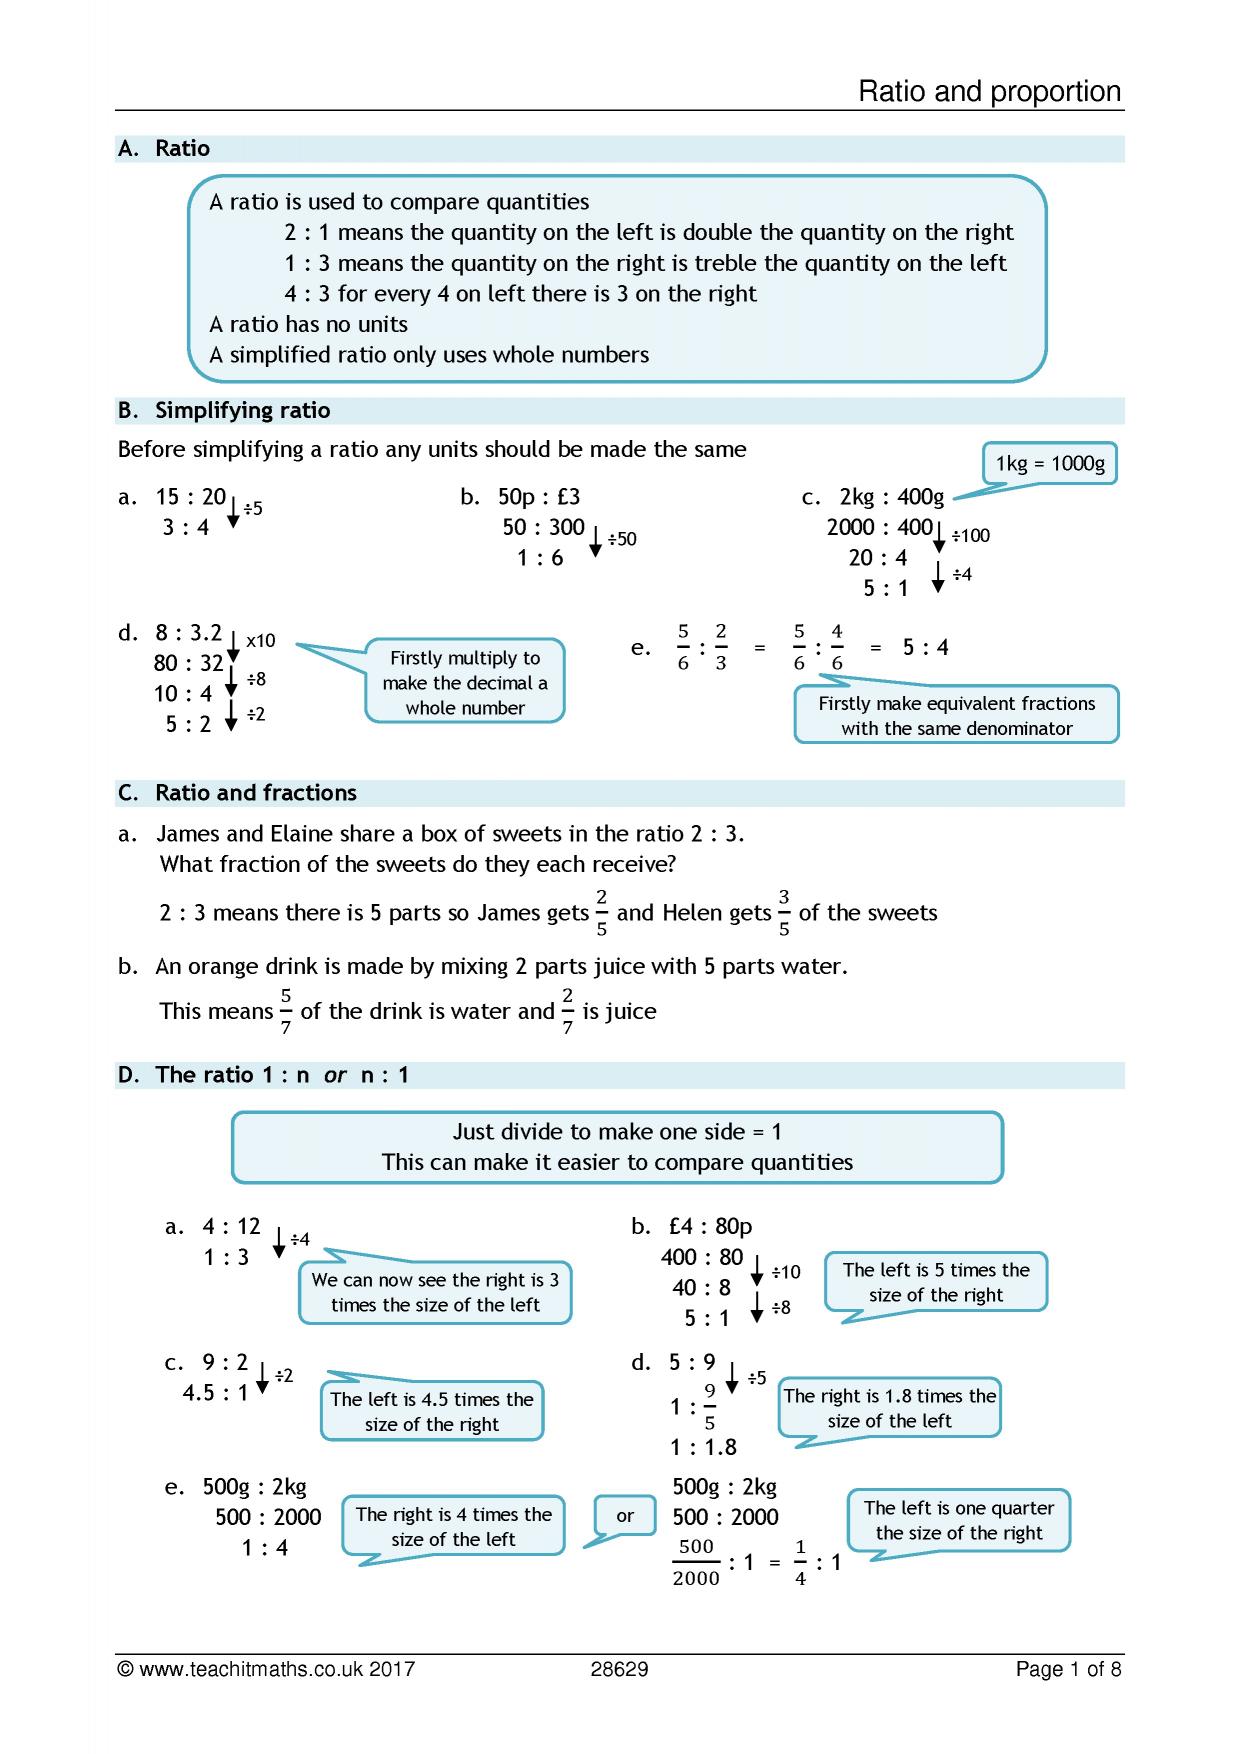 ratio-and-proportion-worksheet-answers